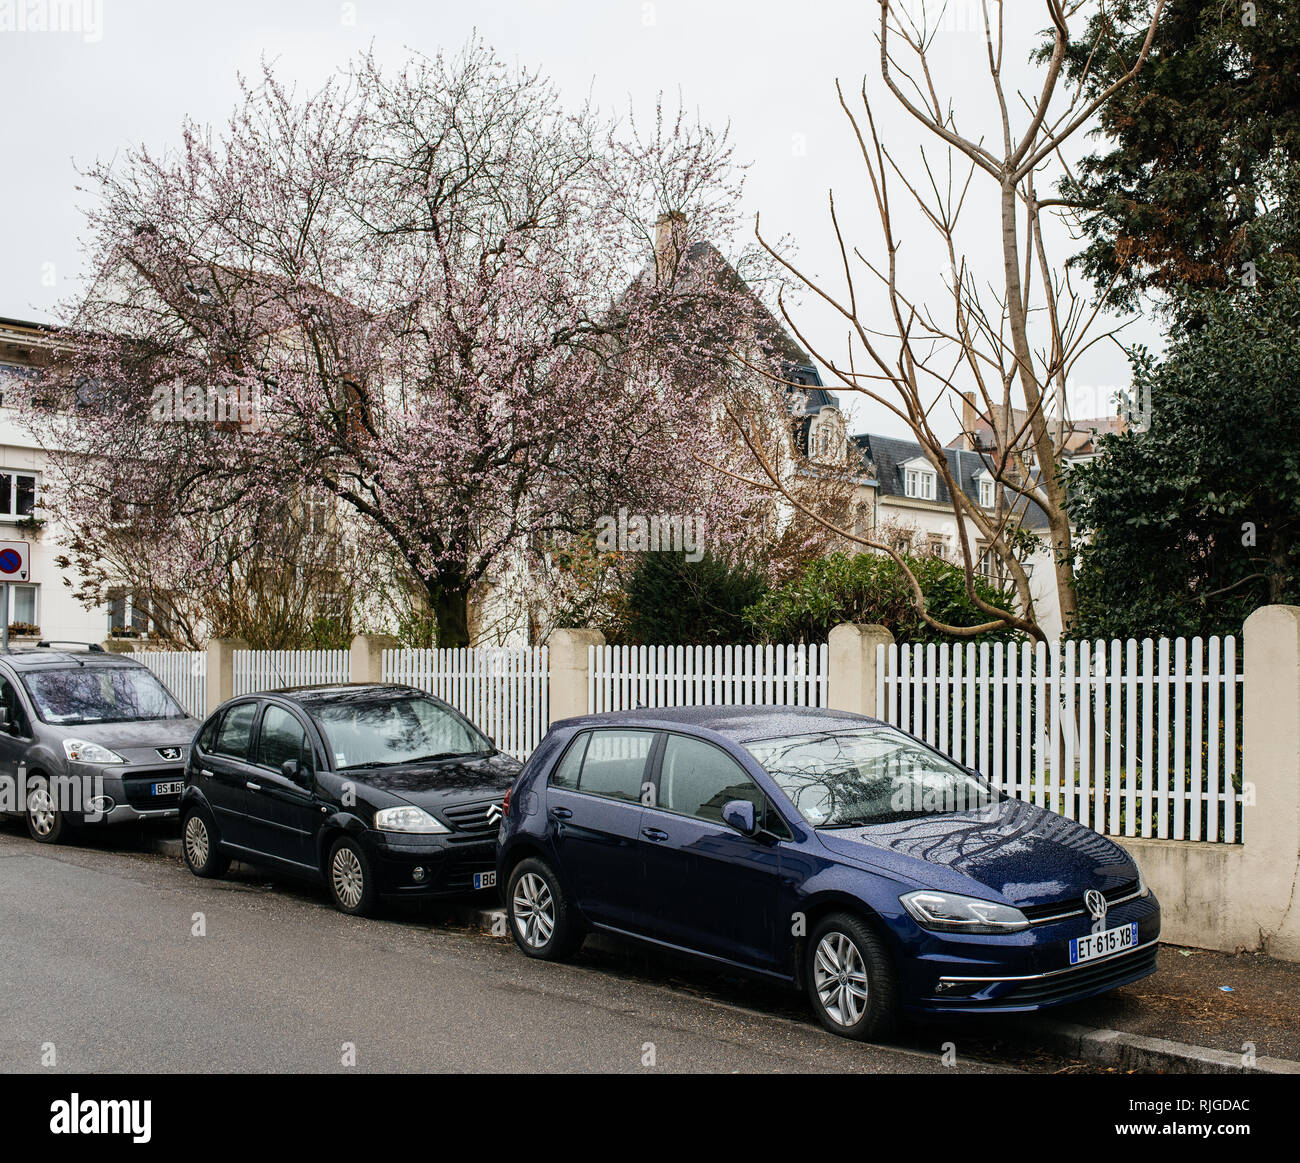 PARIS, FRANCE - SEP 22, 2017: New German Volkswagen Golf small car car parked on the street next to Citroen and Peugeot car covered with rain drops Stock Photo